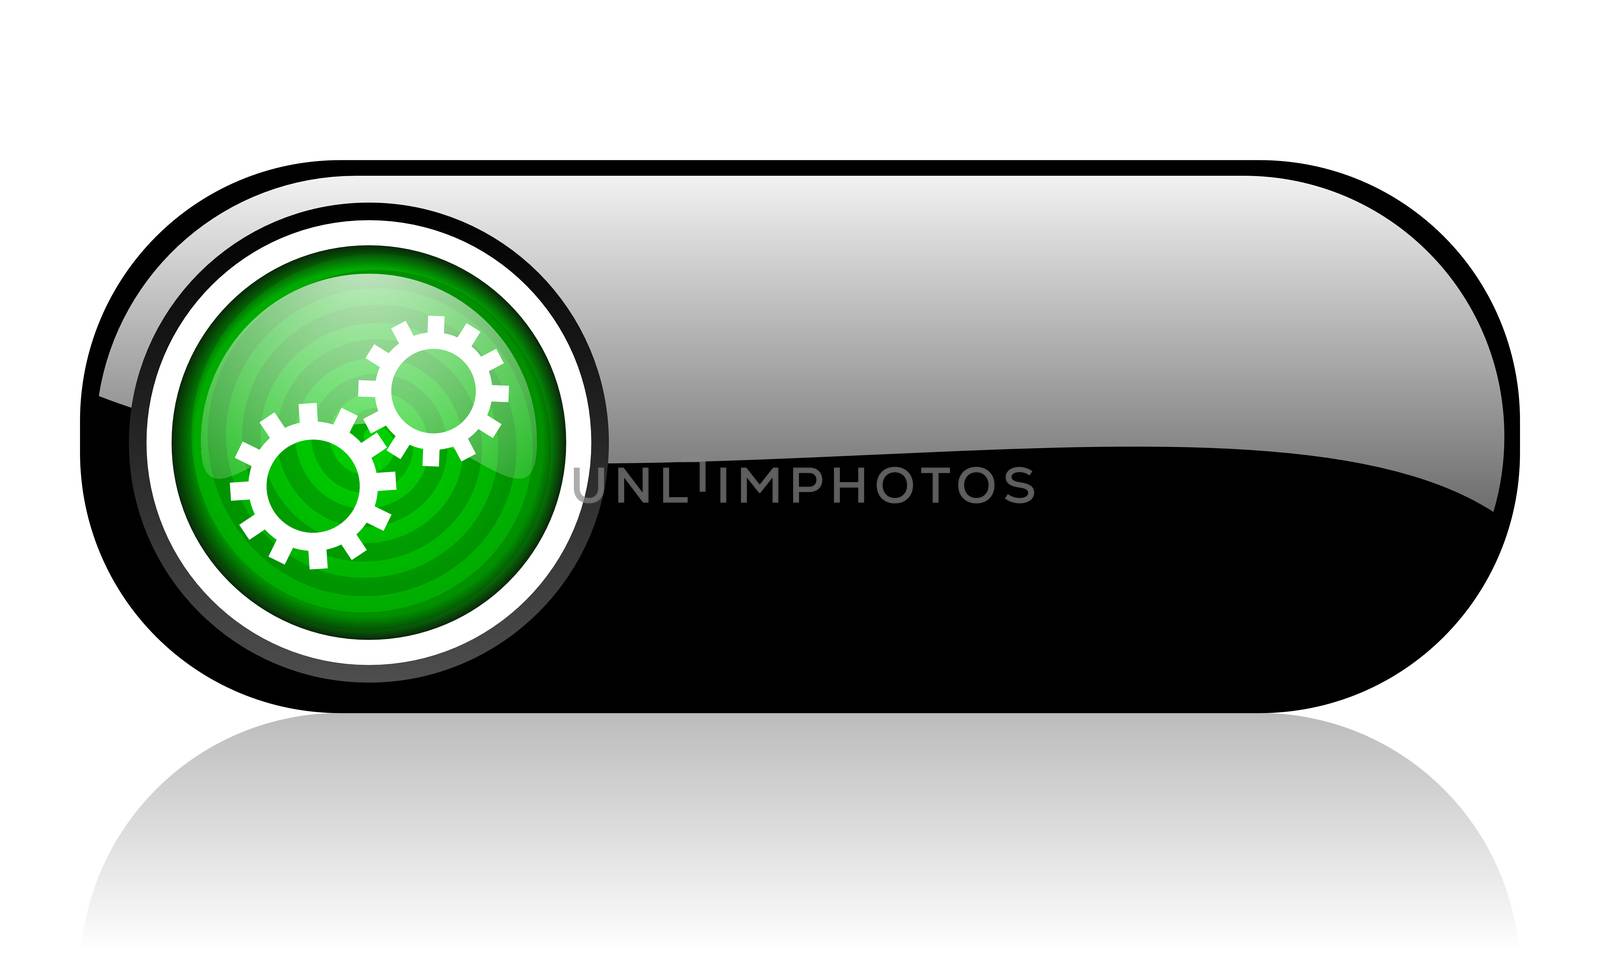 gears black and green web icon on white background by alexwhite